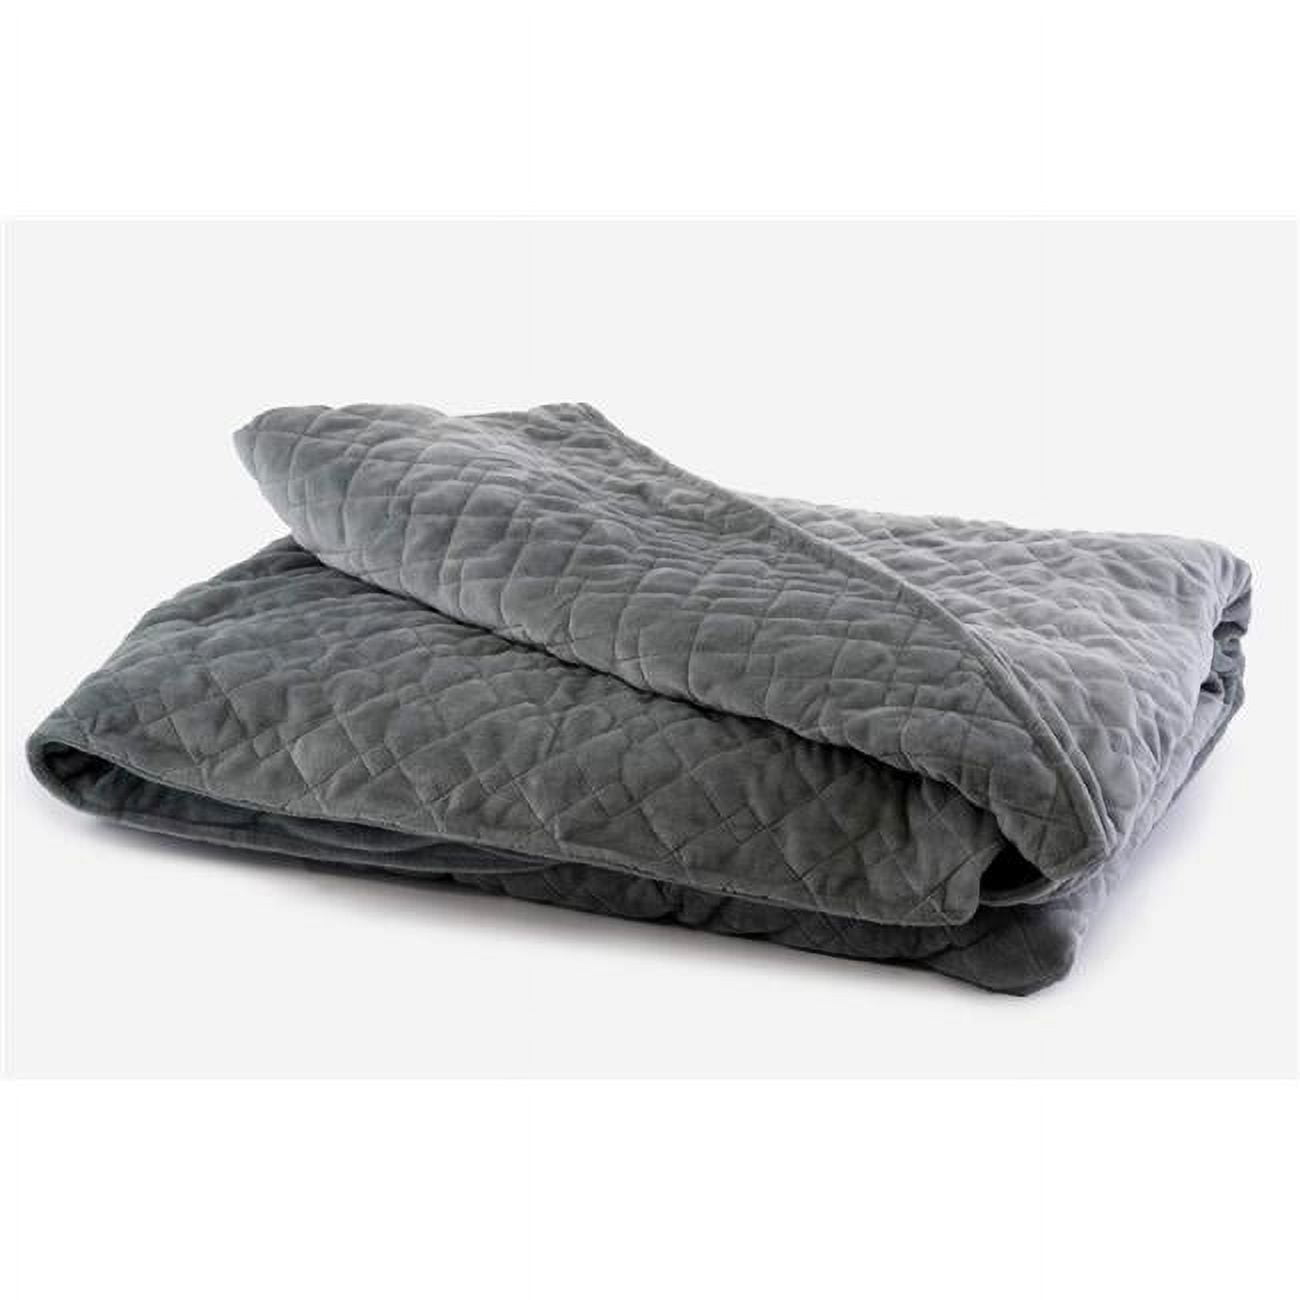 Dc6080-dm-ws 60 X 80 In. Diamond Quilted Minky Super Soft Duvet Cover - Gray